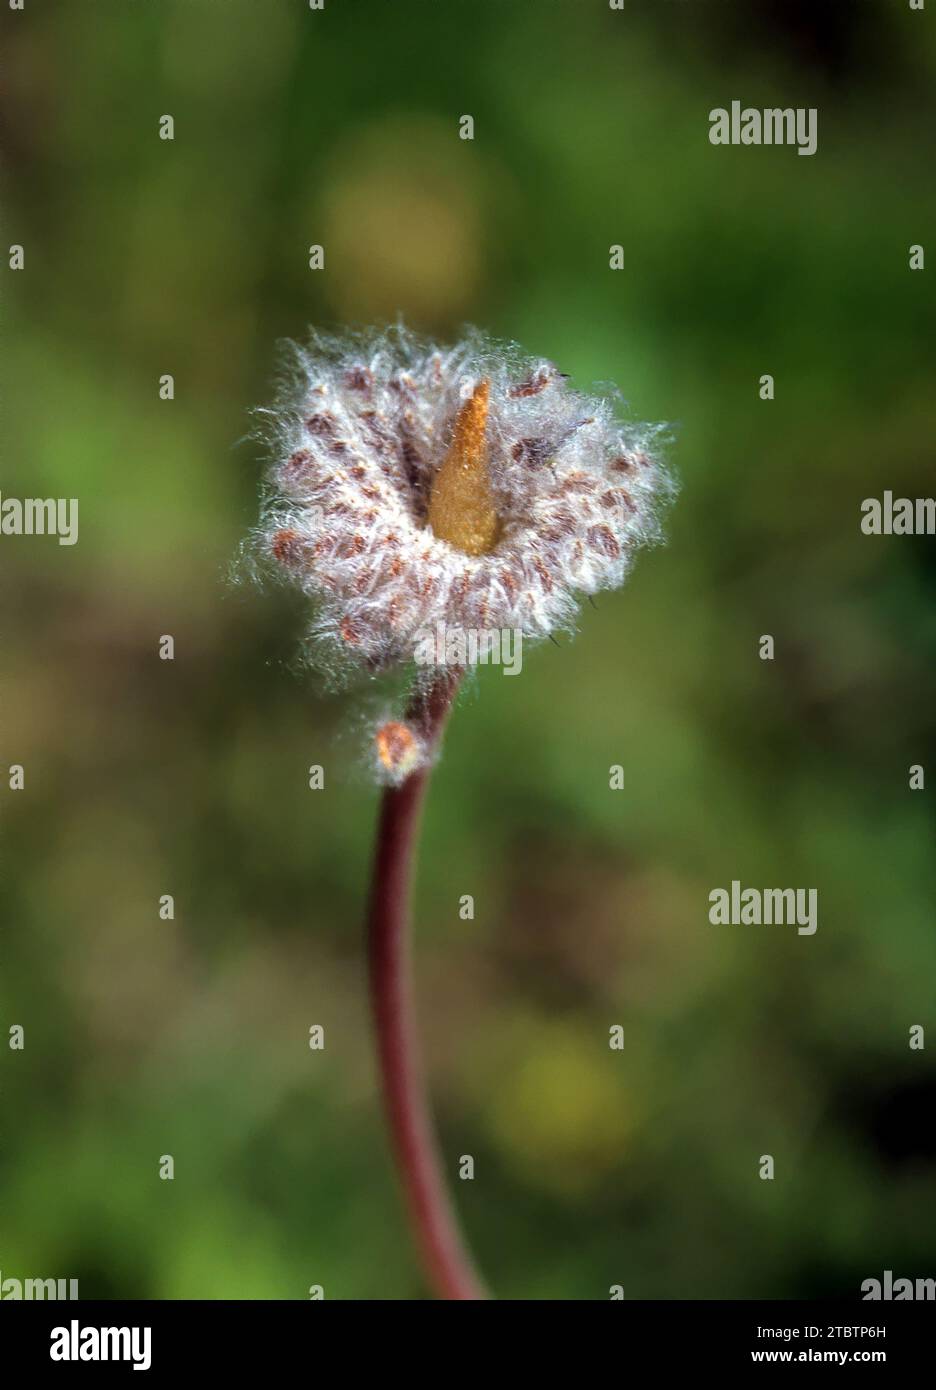 Seeds after flowering of Anemone coronaria, the poppy anemone, Spanish marigold, or windflower, Stock Photo